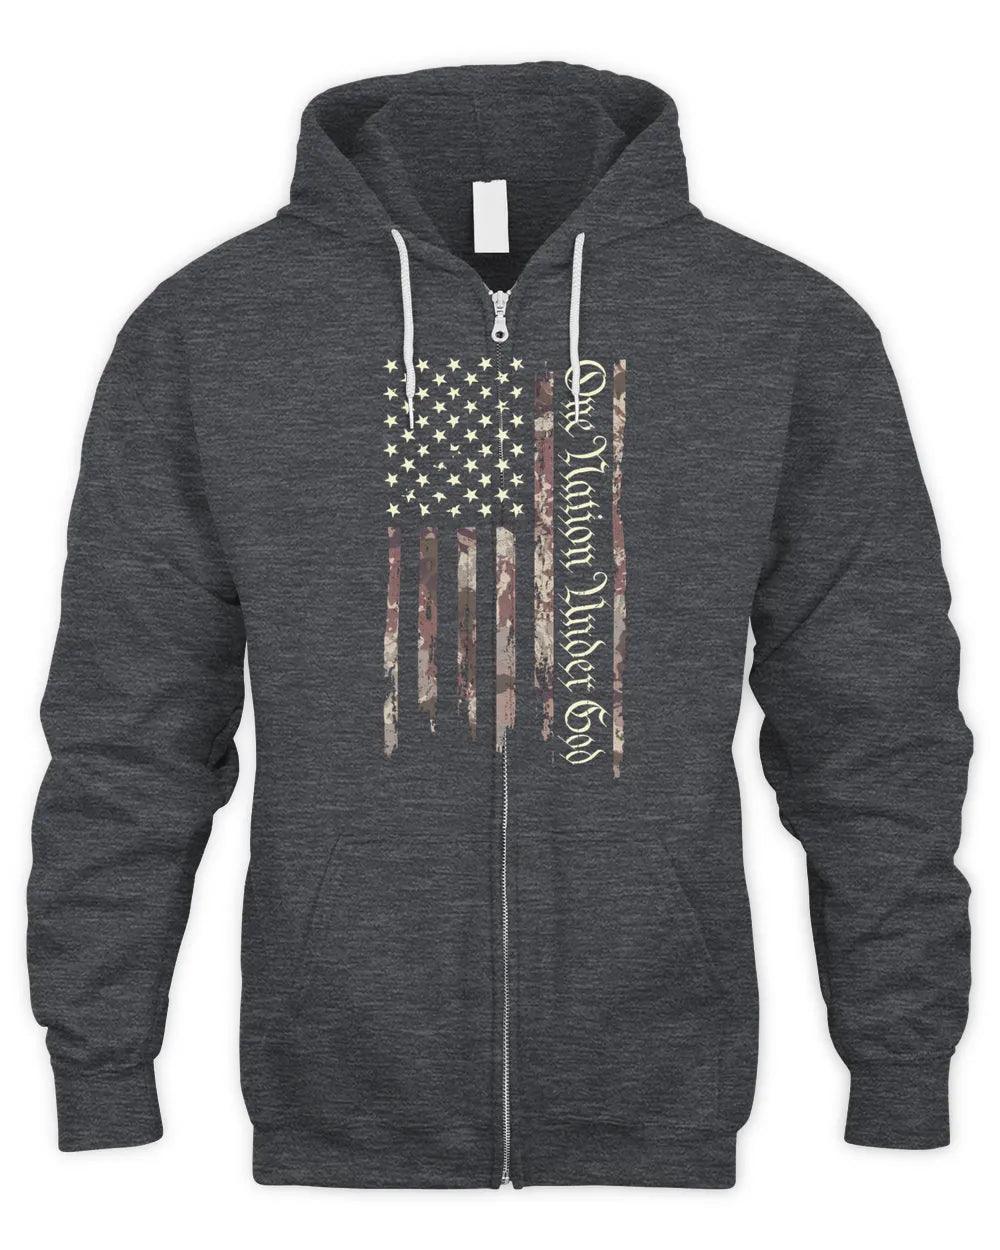 One Nation Zip Hood - Charcoal - Purpose-Built / Home of the Trades